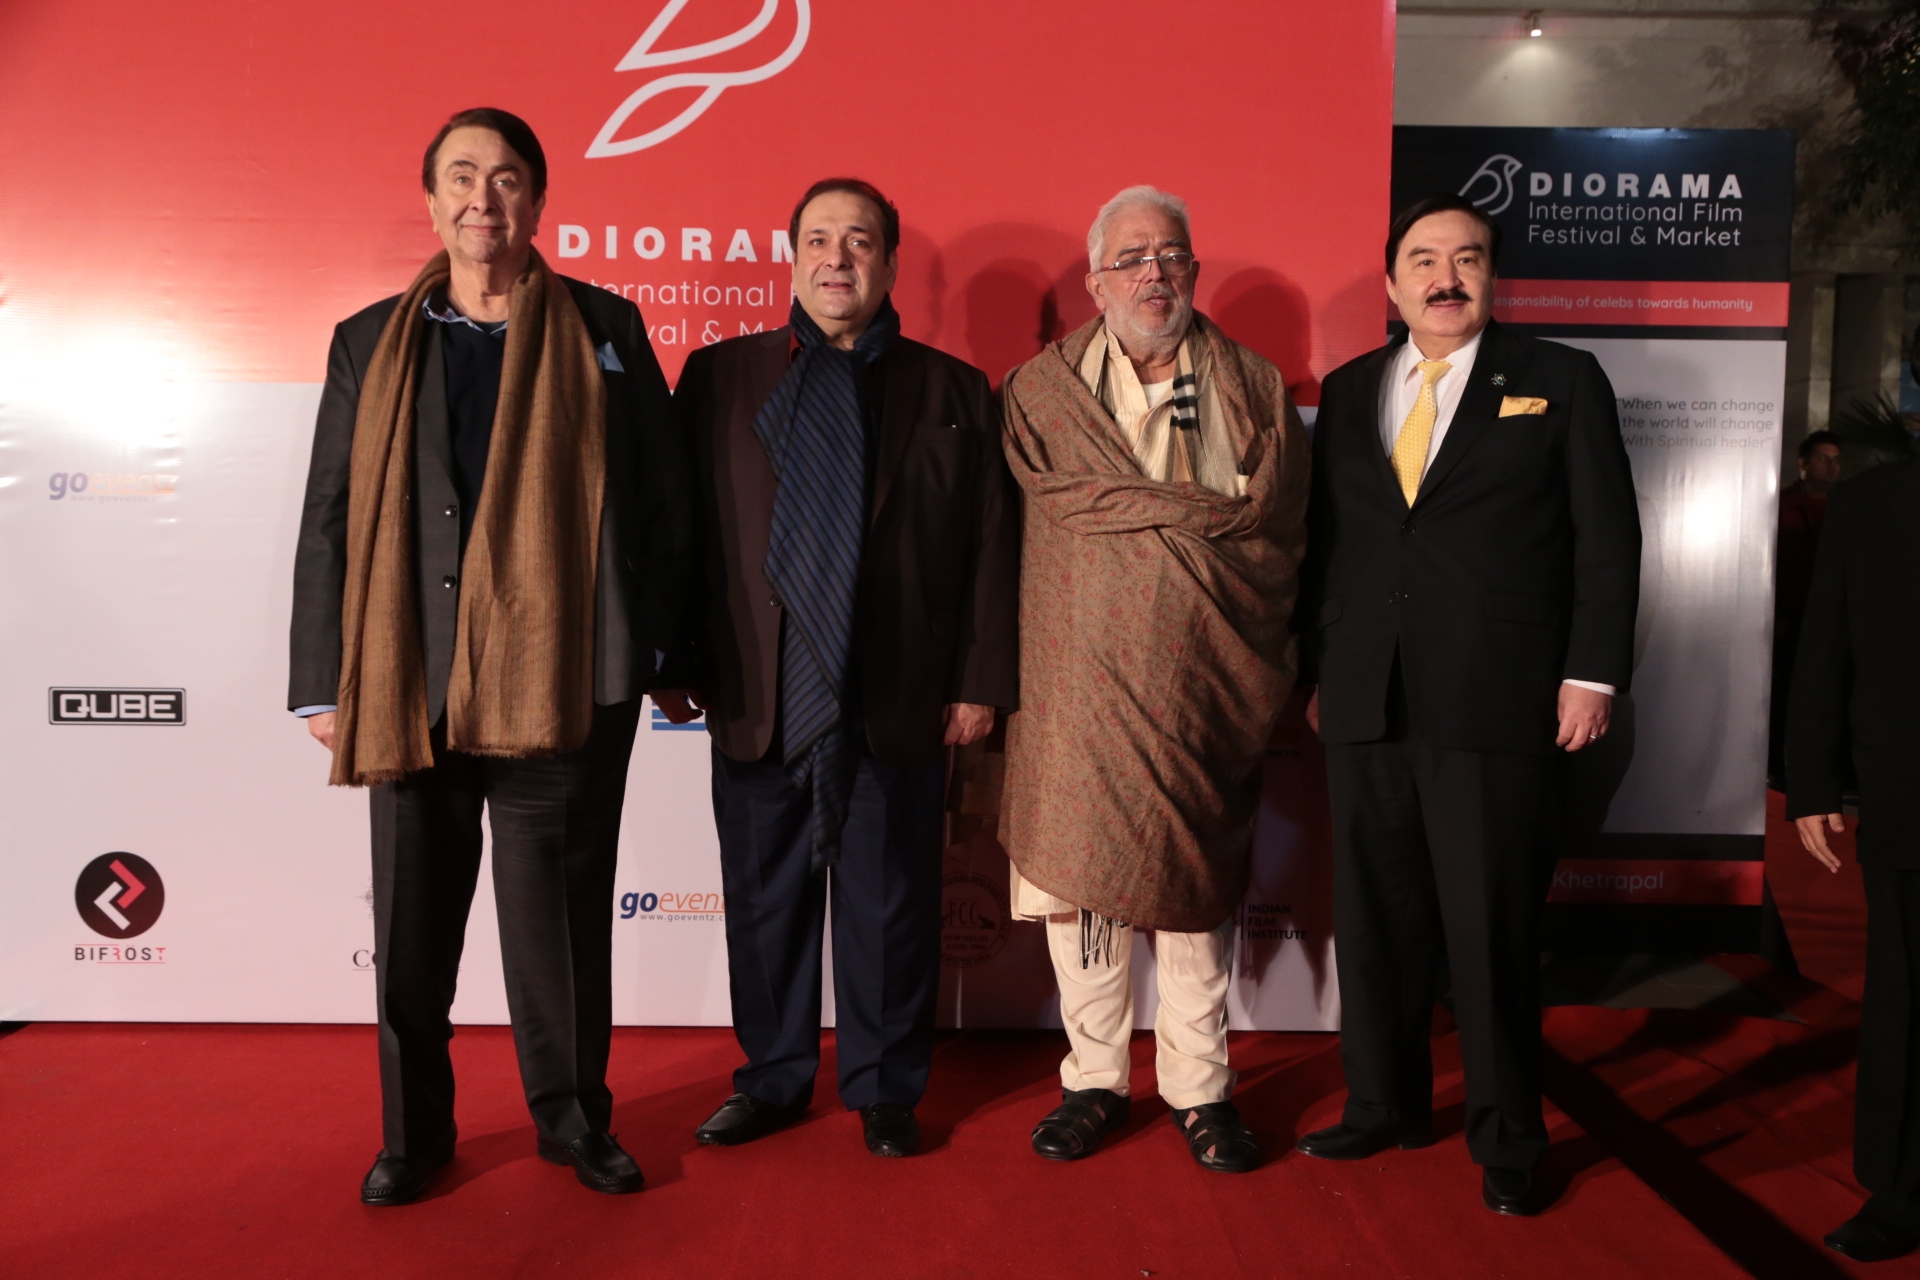 104 films screened in opening edition of Diorama Film Festival, Subhash Ghai wins honor